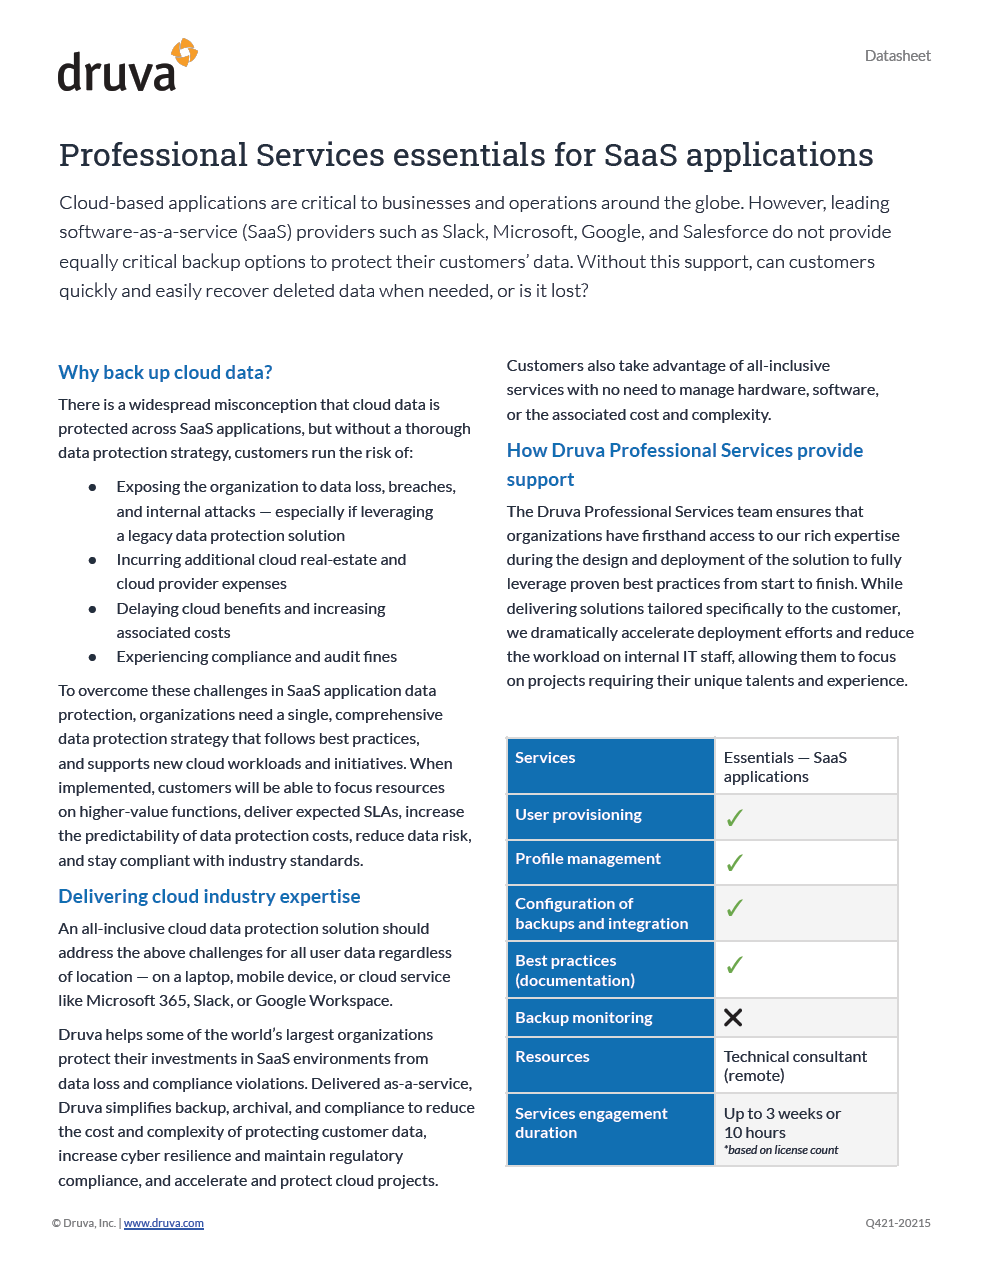 Druva Professional Services essentials for SaaS applications